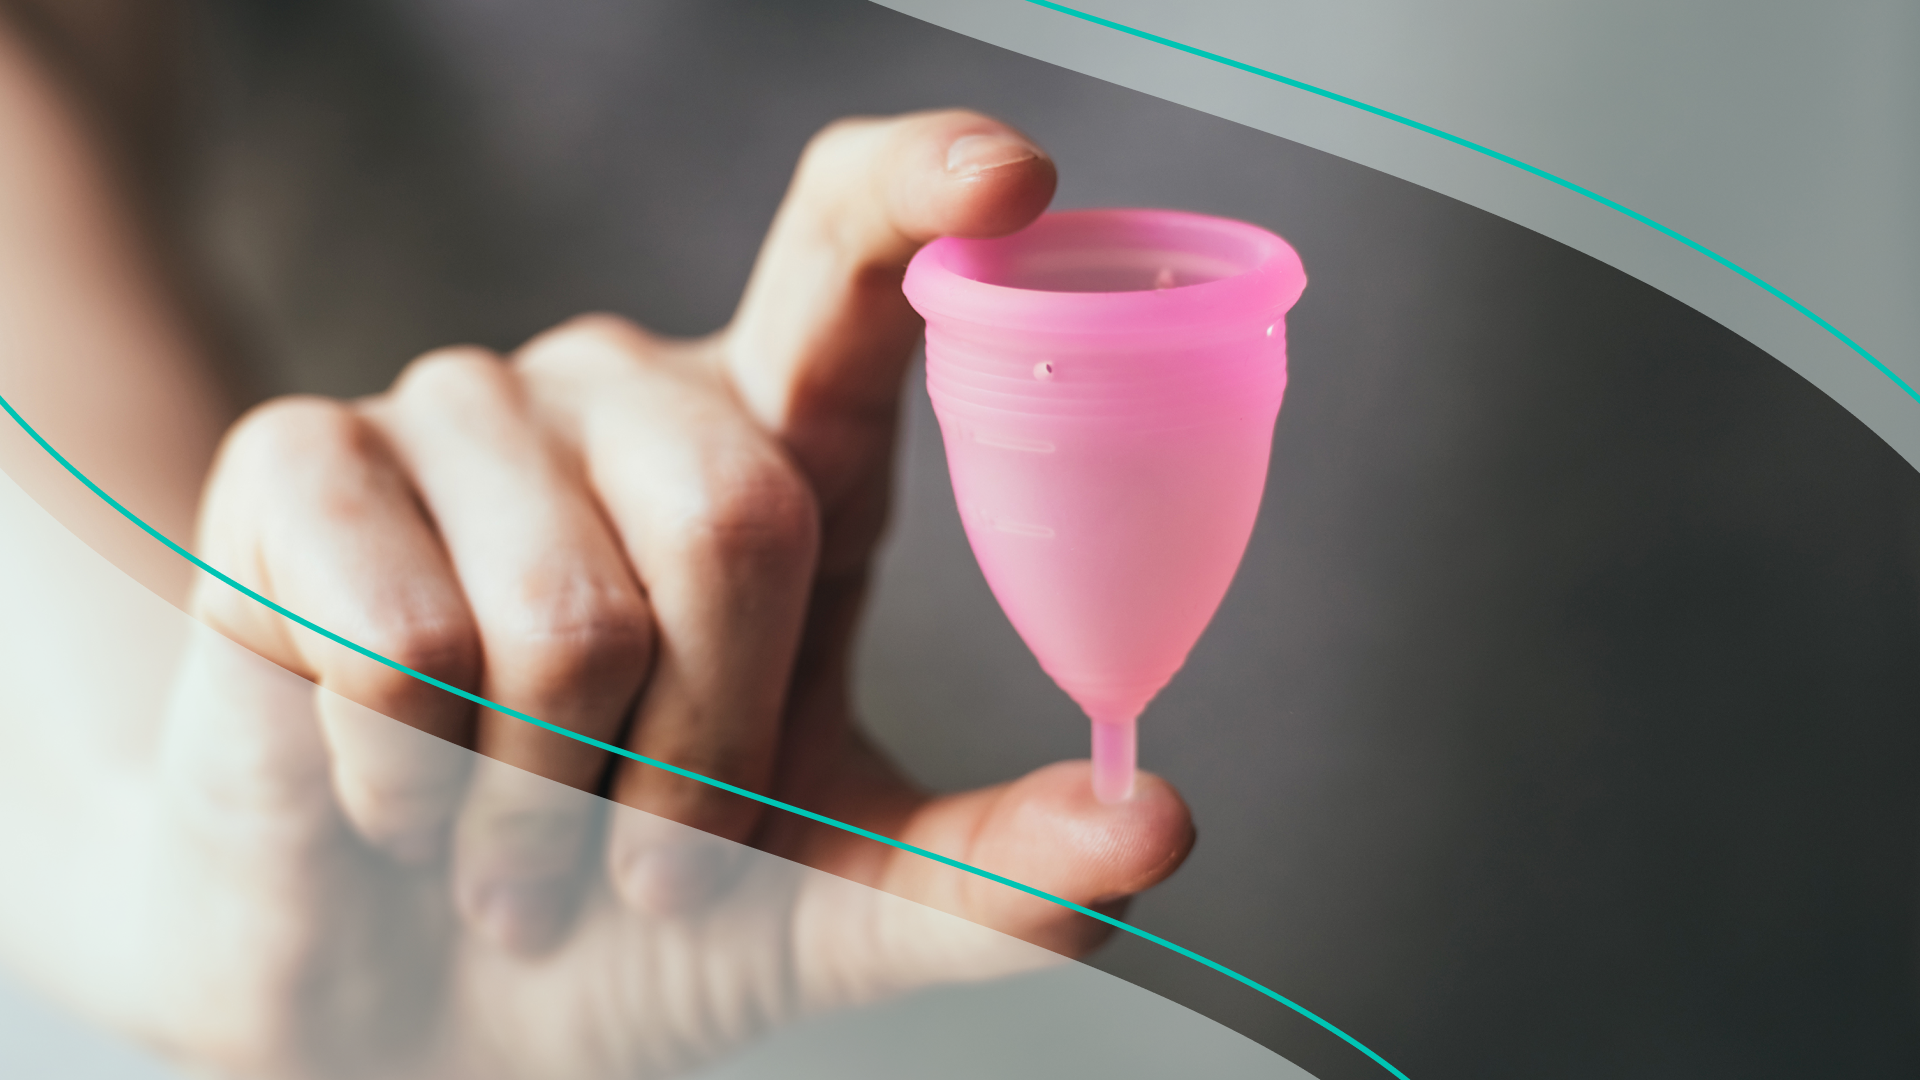 A person's hand holding a pink menstrual cup 